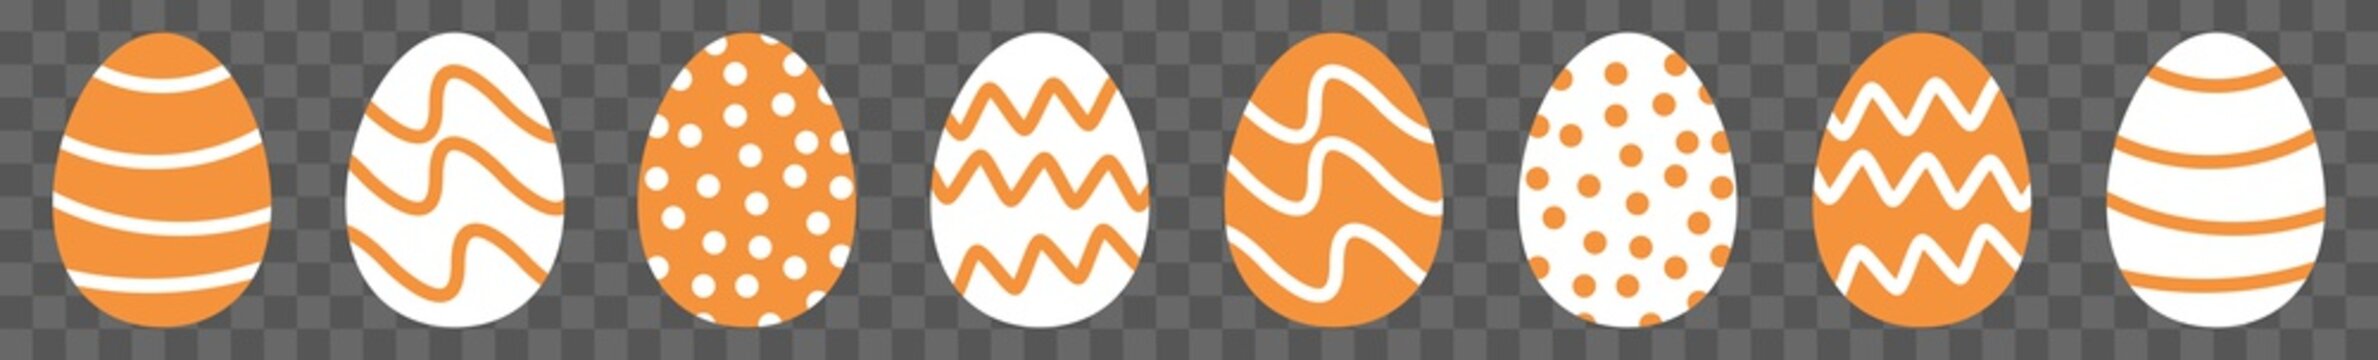 Easter Egg Icon Orange | Painted Eggs Illustration | Happy Easter Hunt Symbol | Holiday Logo | April Spring Sign | Isolated | Variations